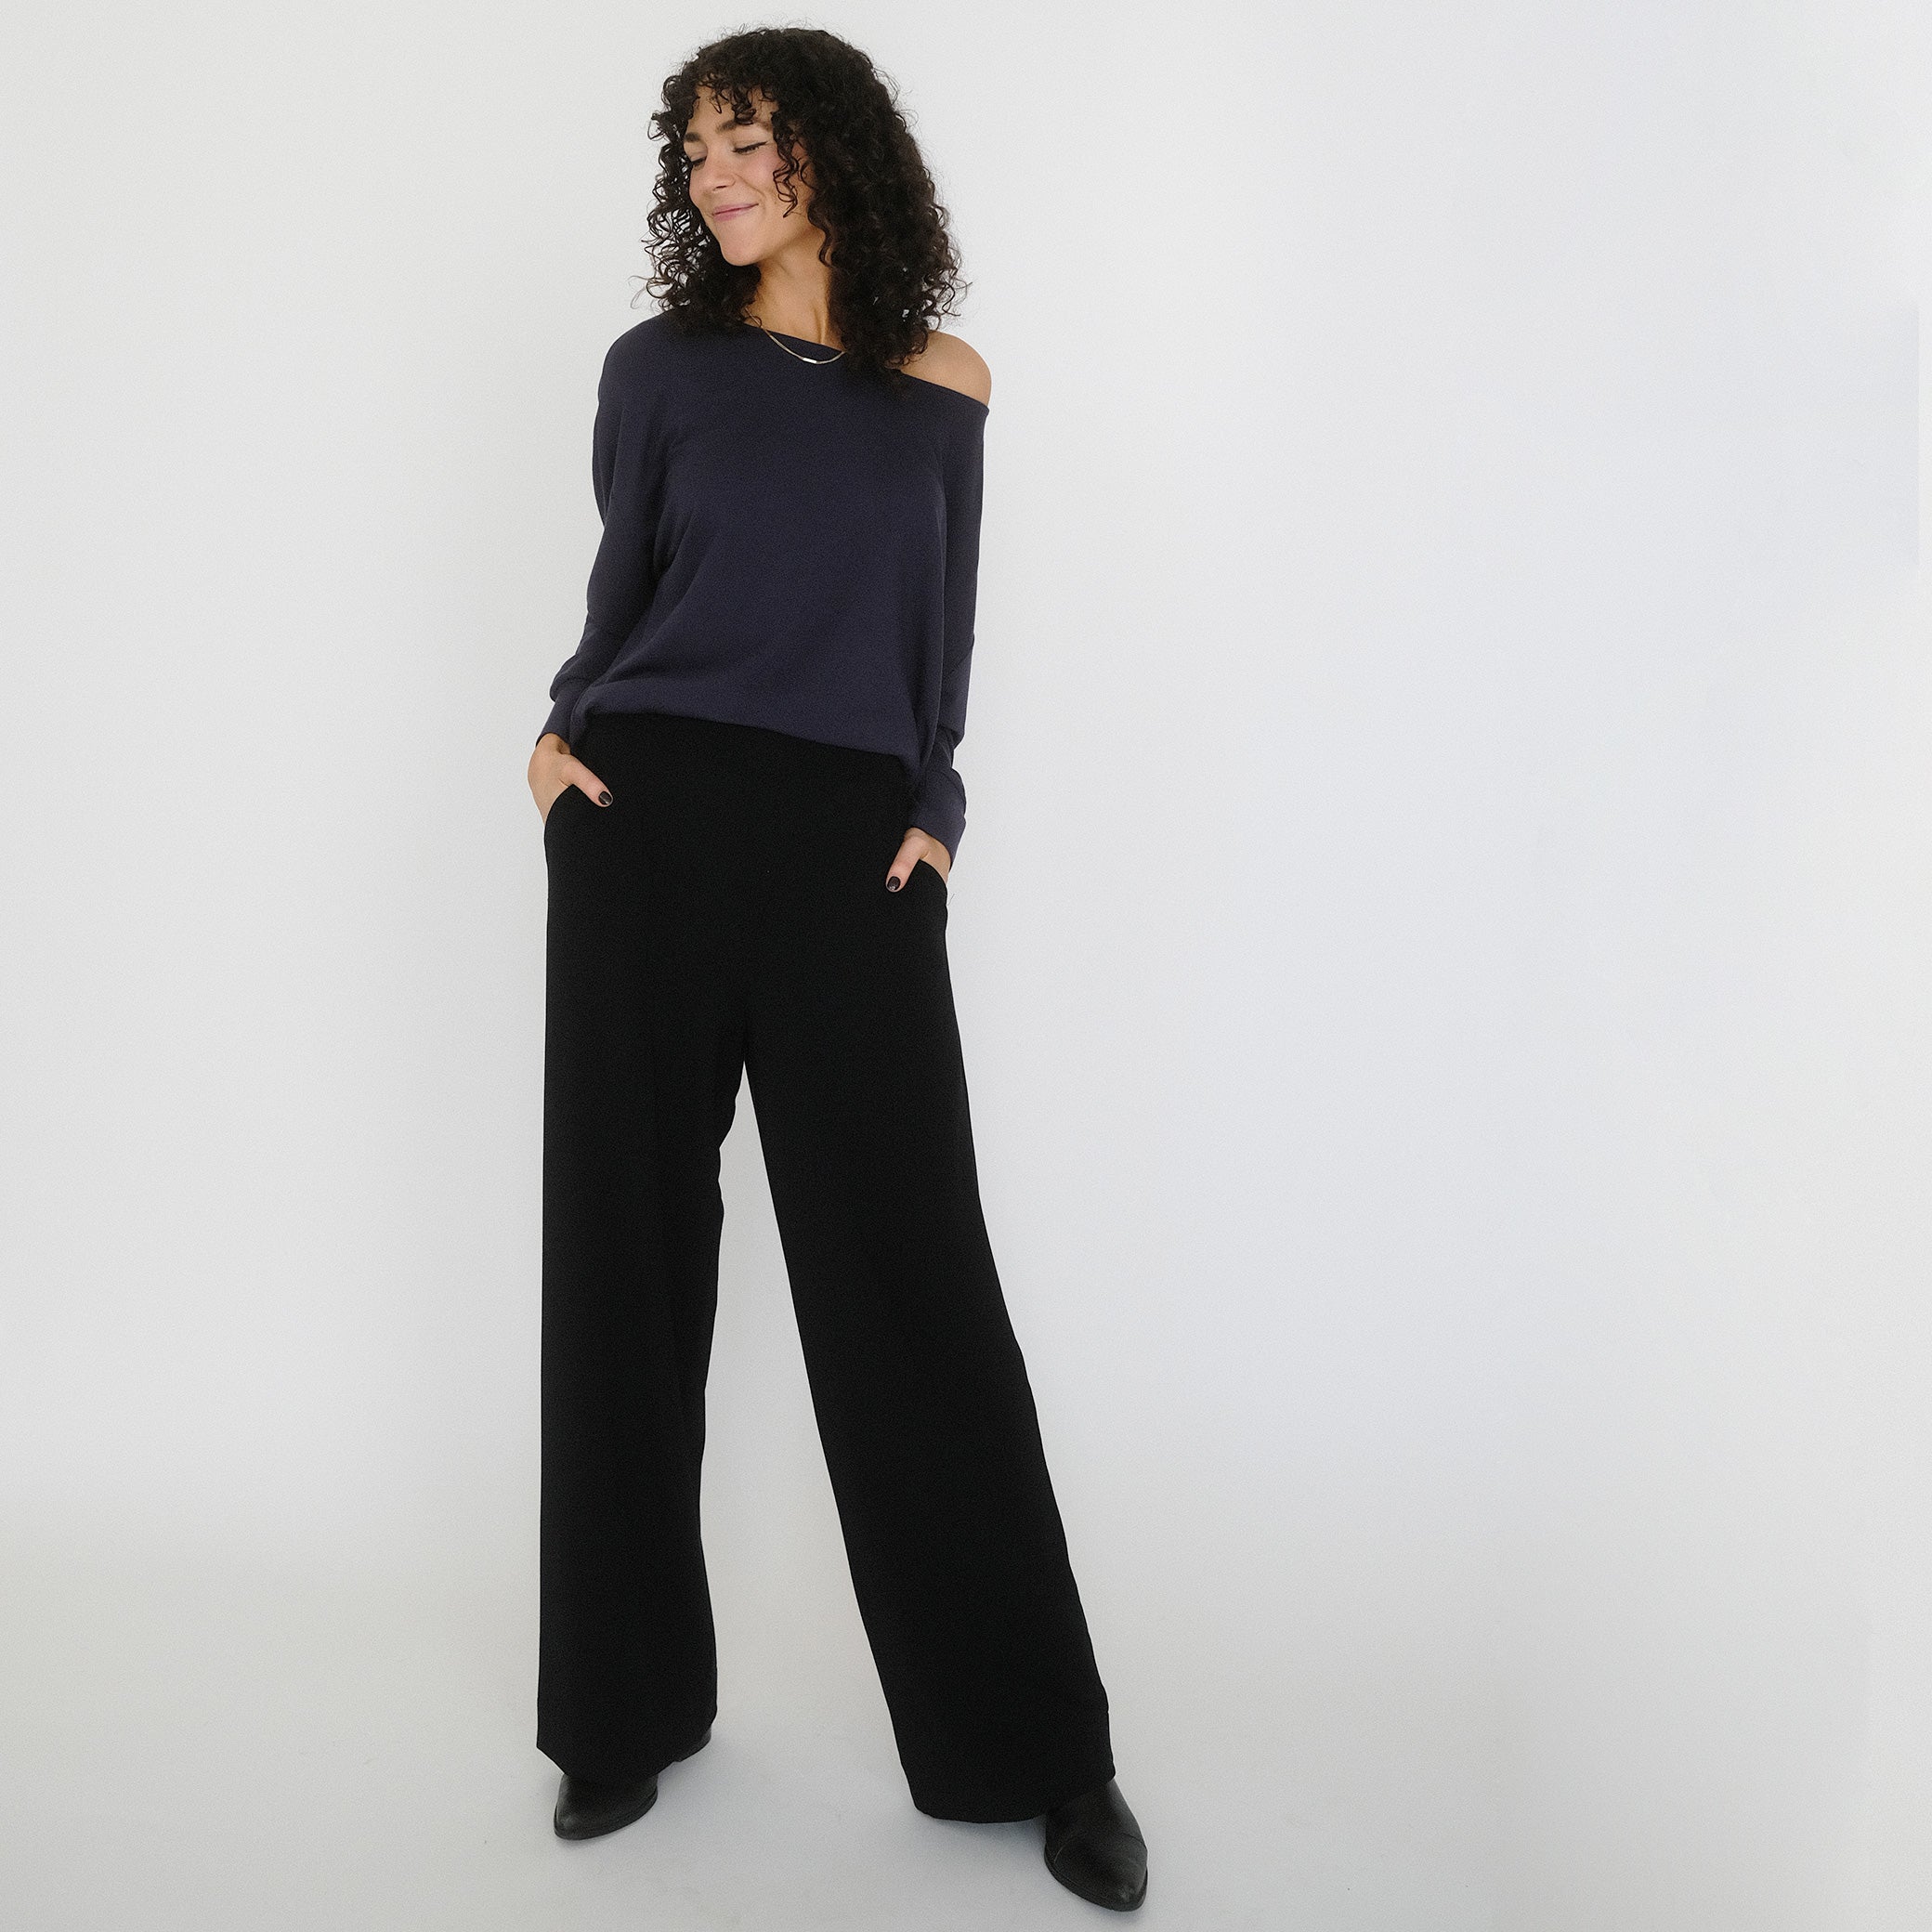 All Kits | Shop Canadian-Made Ethical Women's Clothing at Encircled